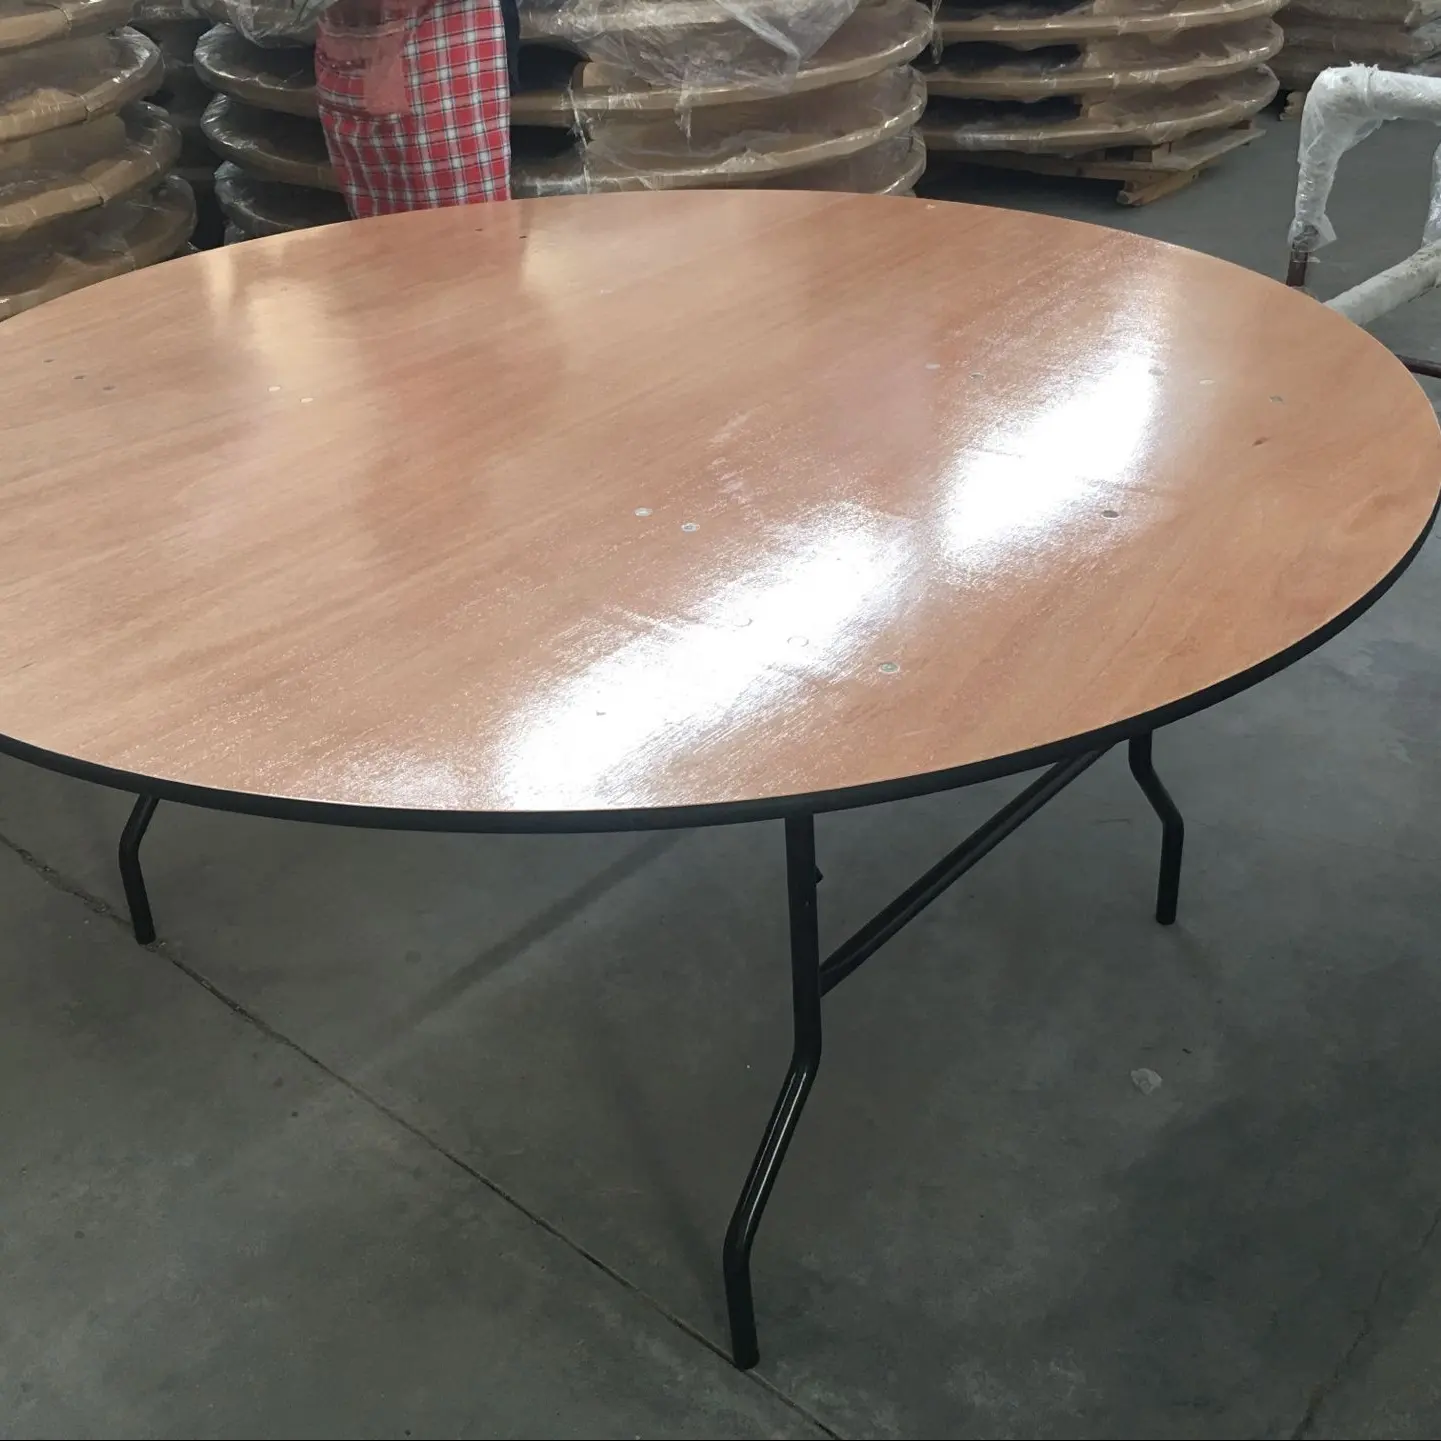 Plywood Banquet Folding Table,   72''(6ft), 60''(5ft) Round Wood Table For Events, Party, Wedding, Rental